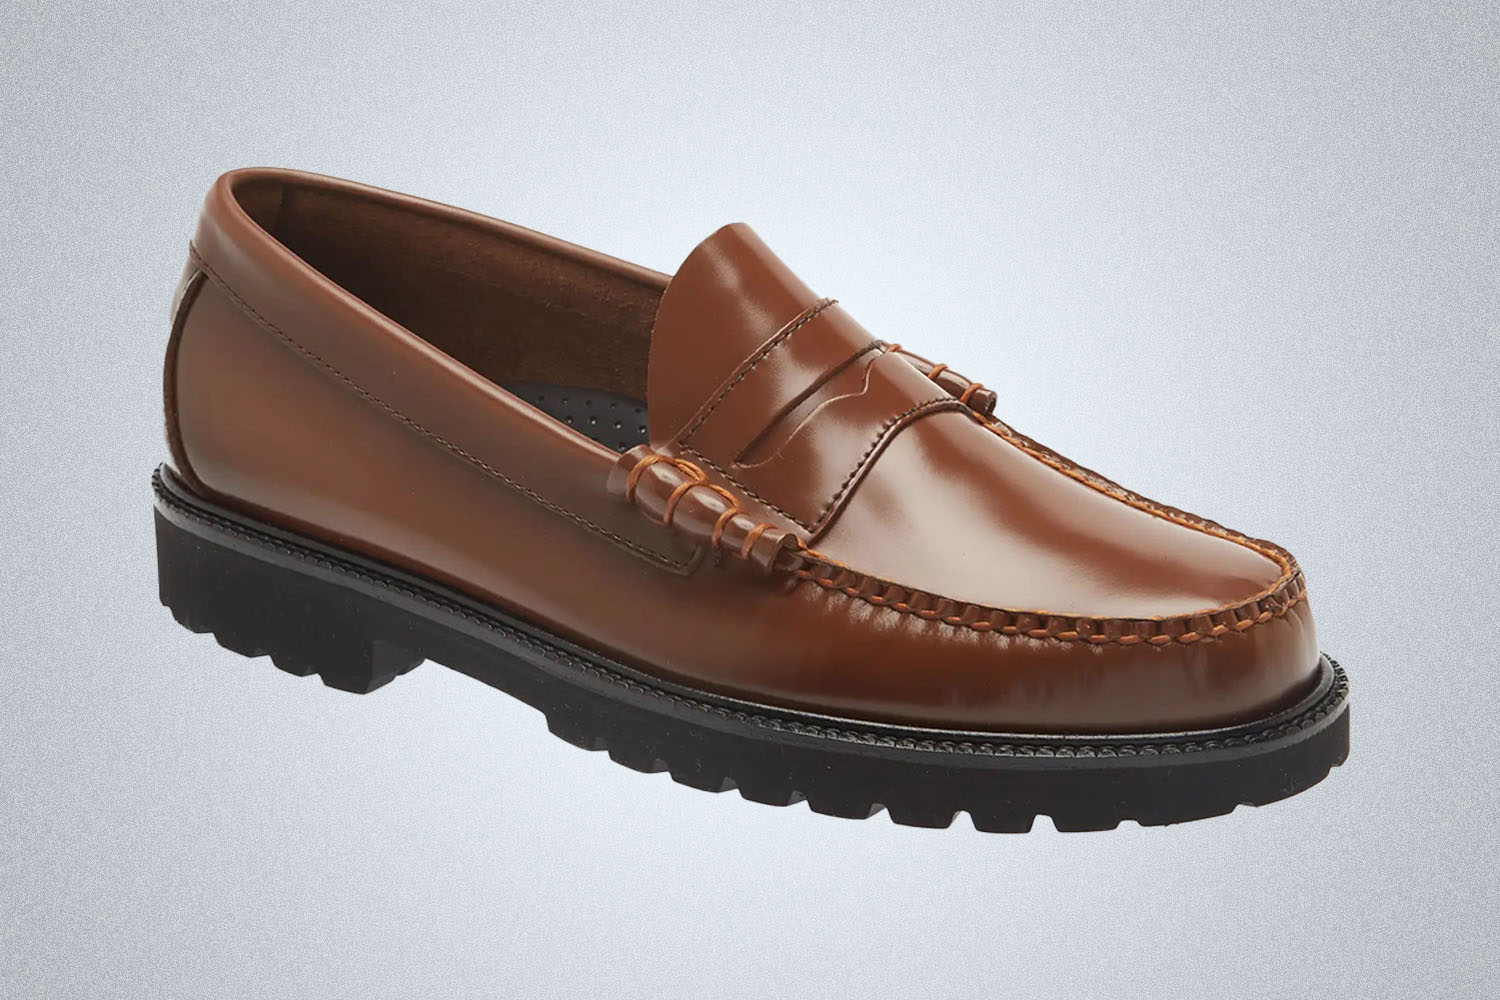 A brown lug sole loafer from G.H. Bass on a grey background